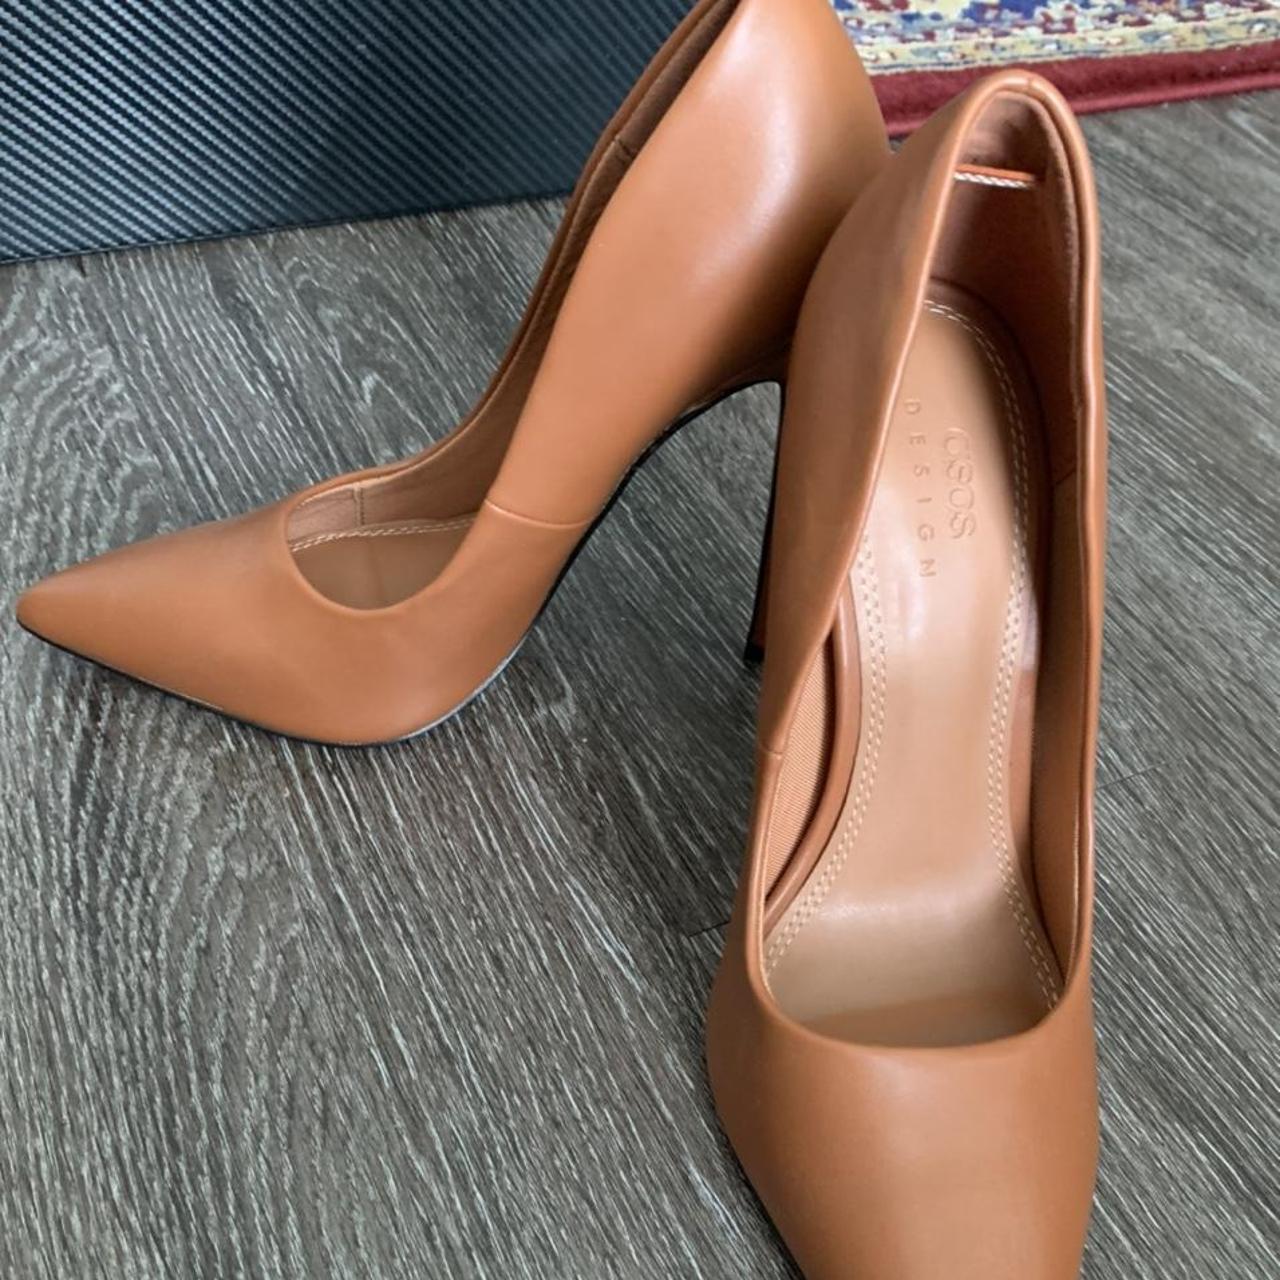 ASOS Women's Tan and Brown Courts